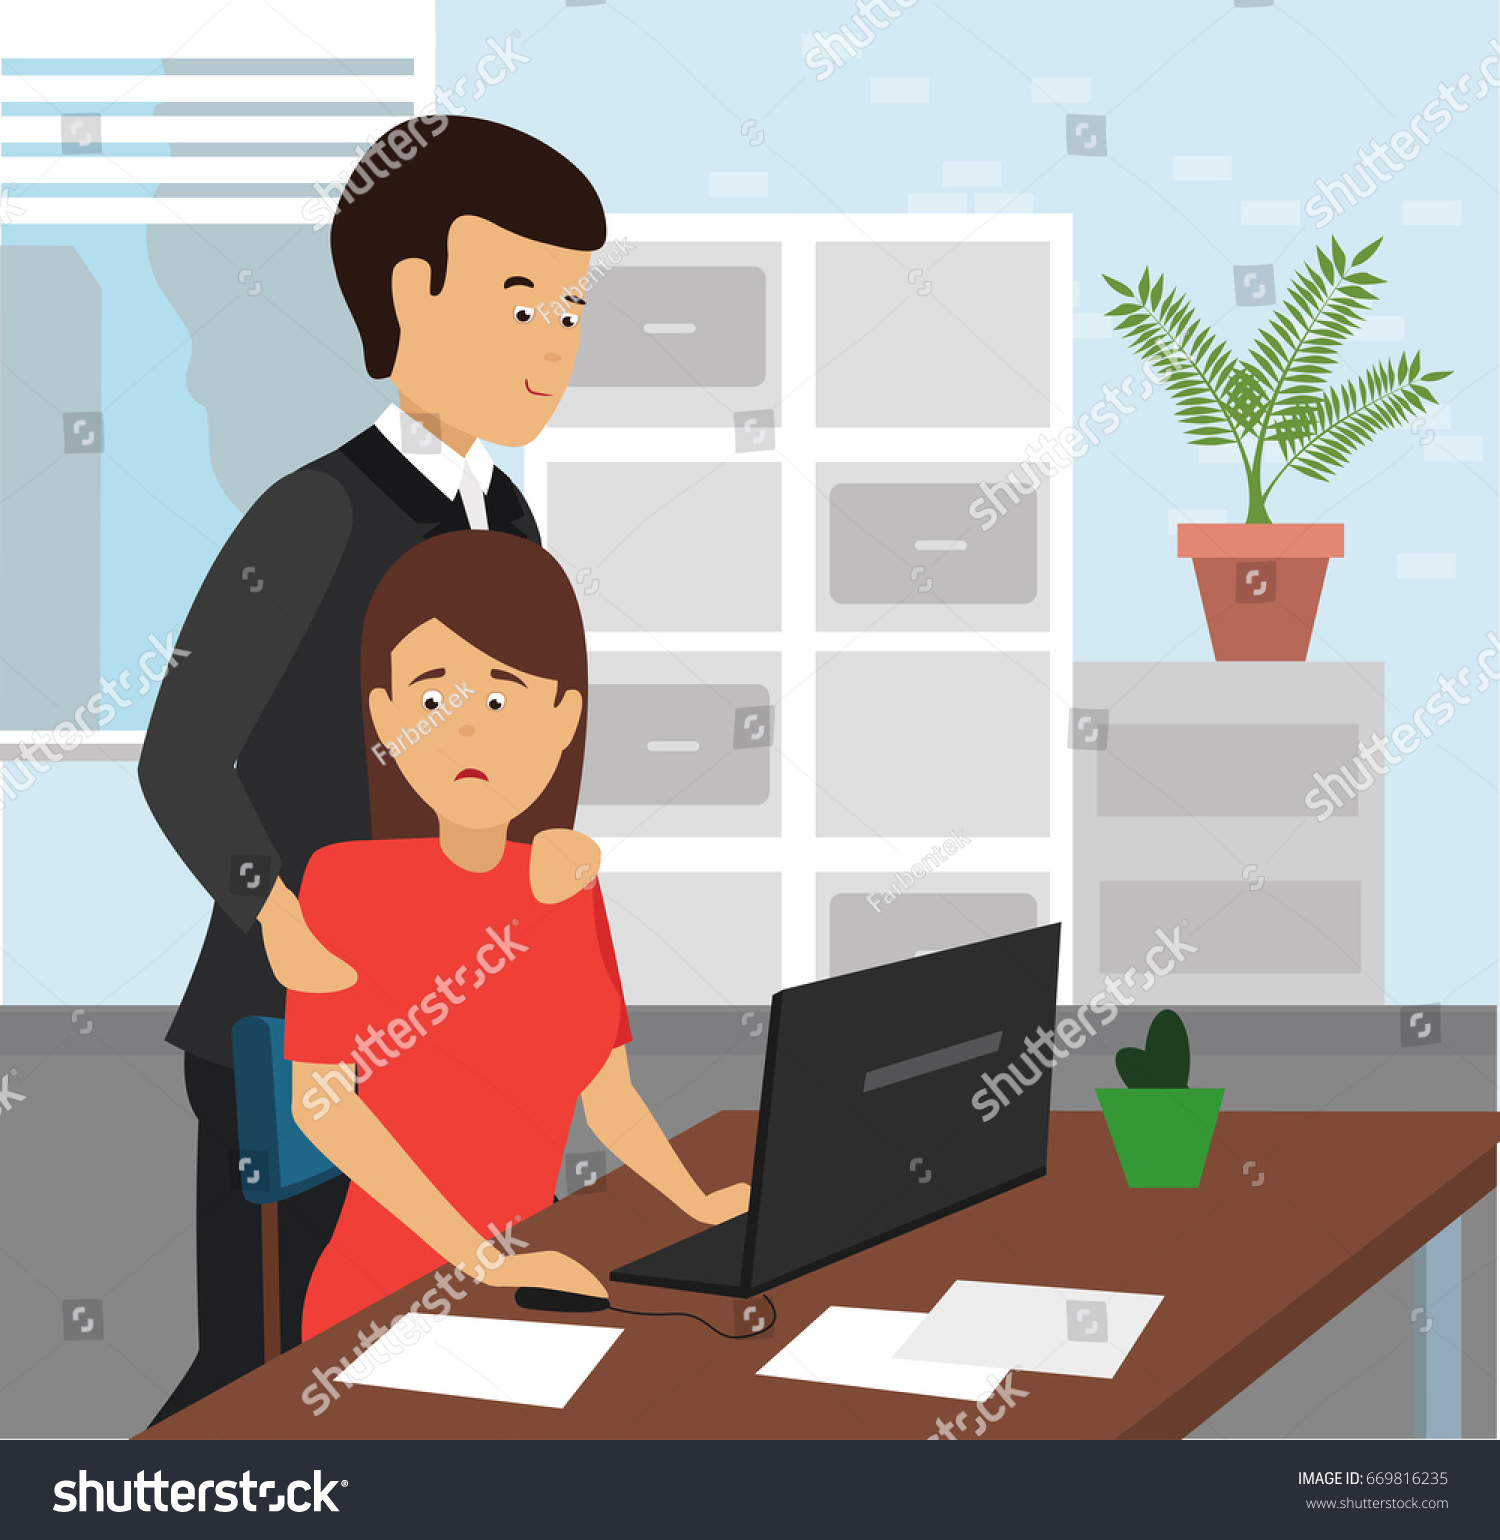 Boss touching the arm to shoulders of his secretary at office. Scared woman. Sexual harassment in workplace concept illustration vector.
